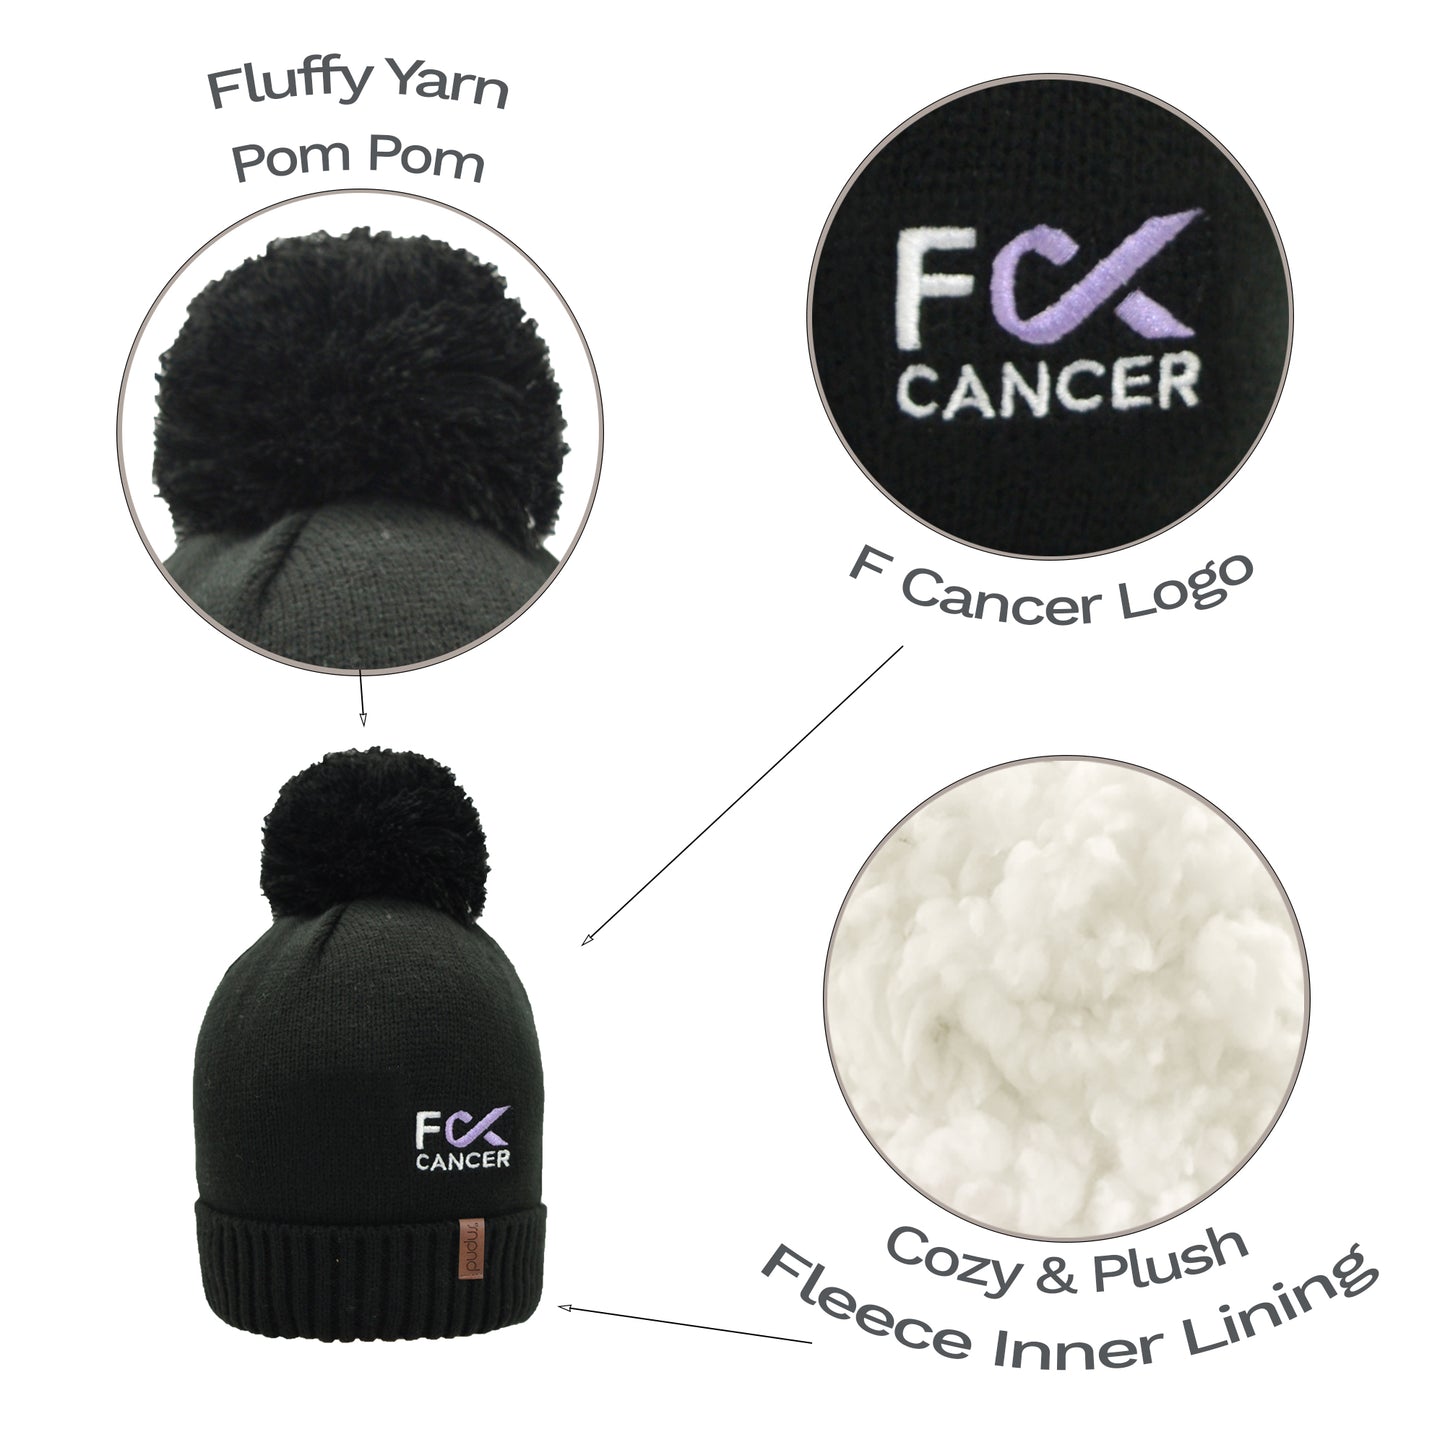 Pudus x F Cancer Unisex Winter Beanie Hat in Black - Fluffy Pom Pom & Warm Fleece Lined Cancer Awareness Chemo Hats